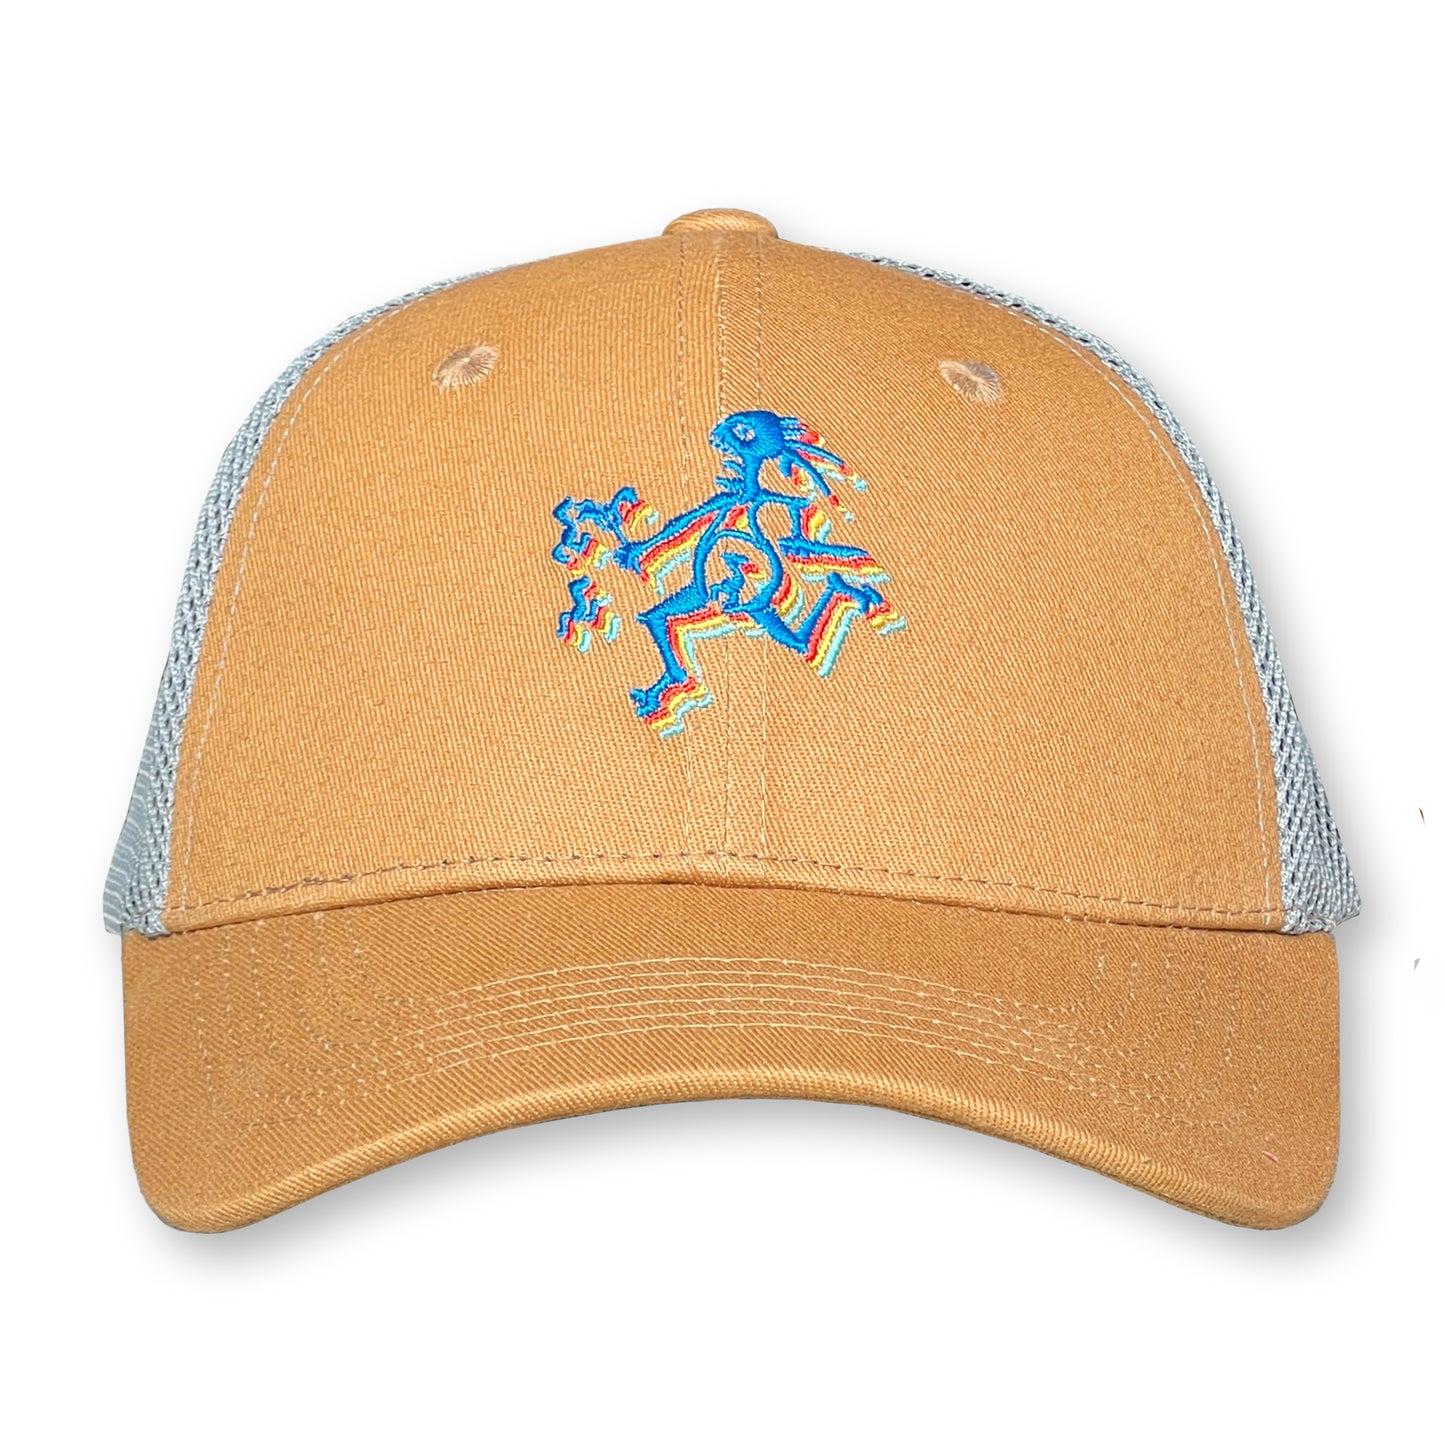 Widespread Panic Trucker Hat / Cashew Cotton with Cloud Mesh and Sapphire Note Eater